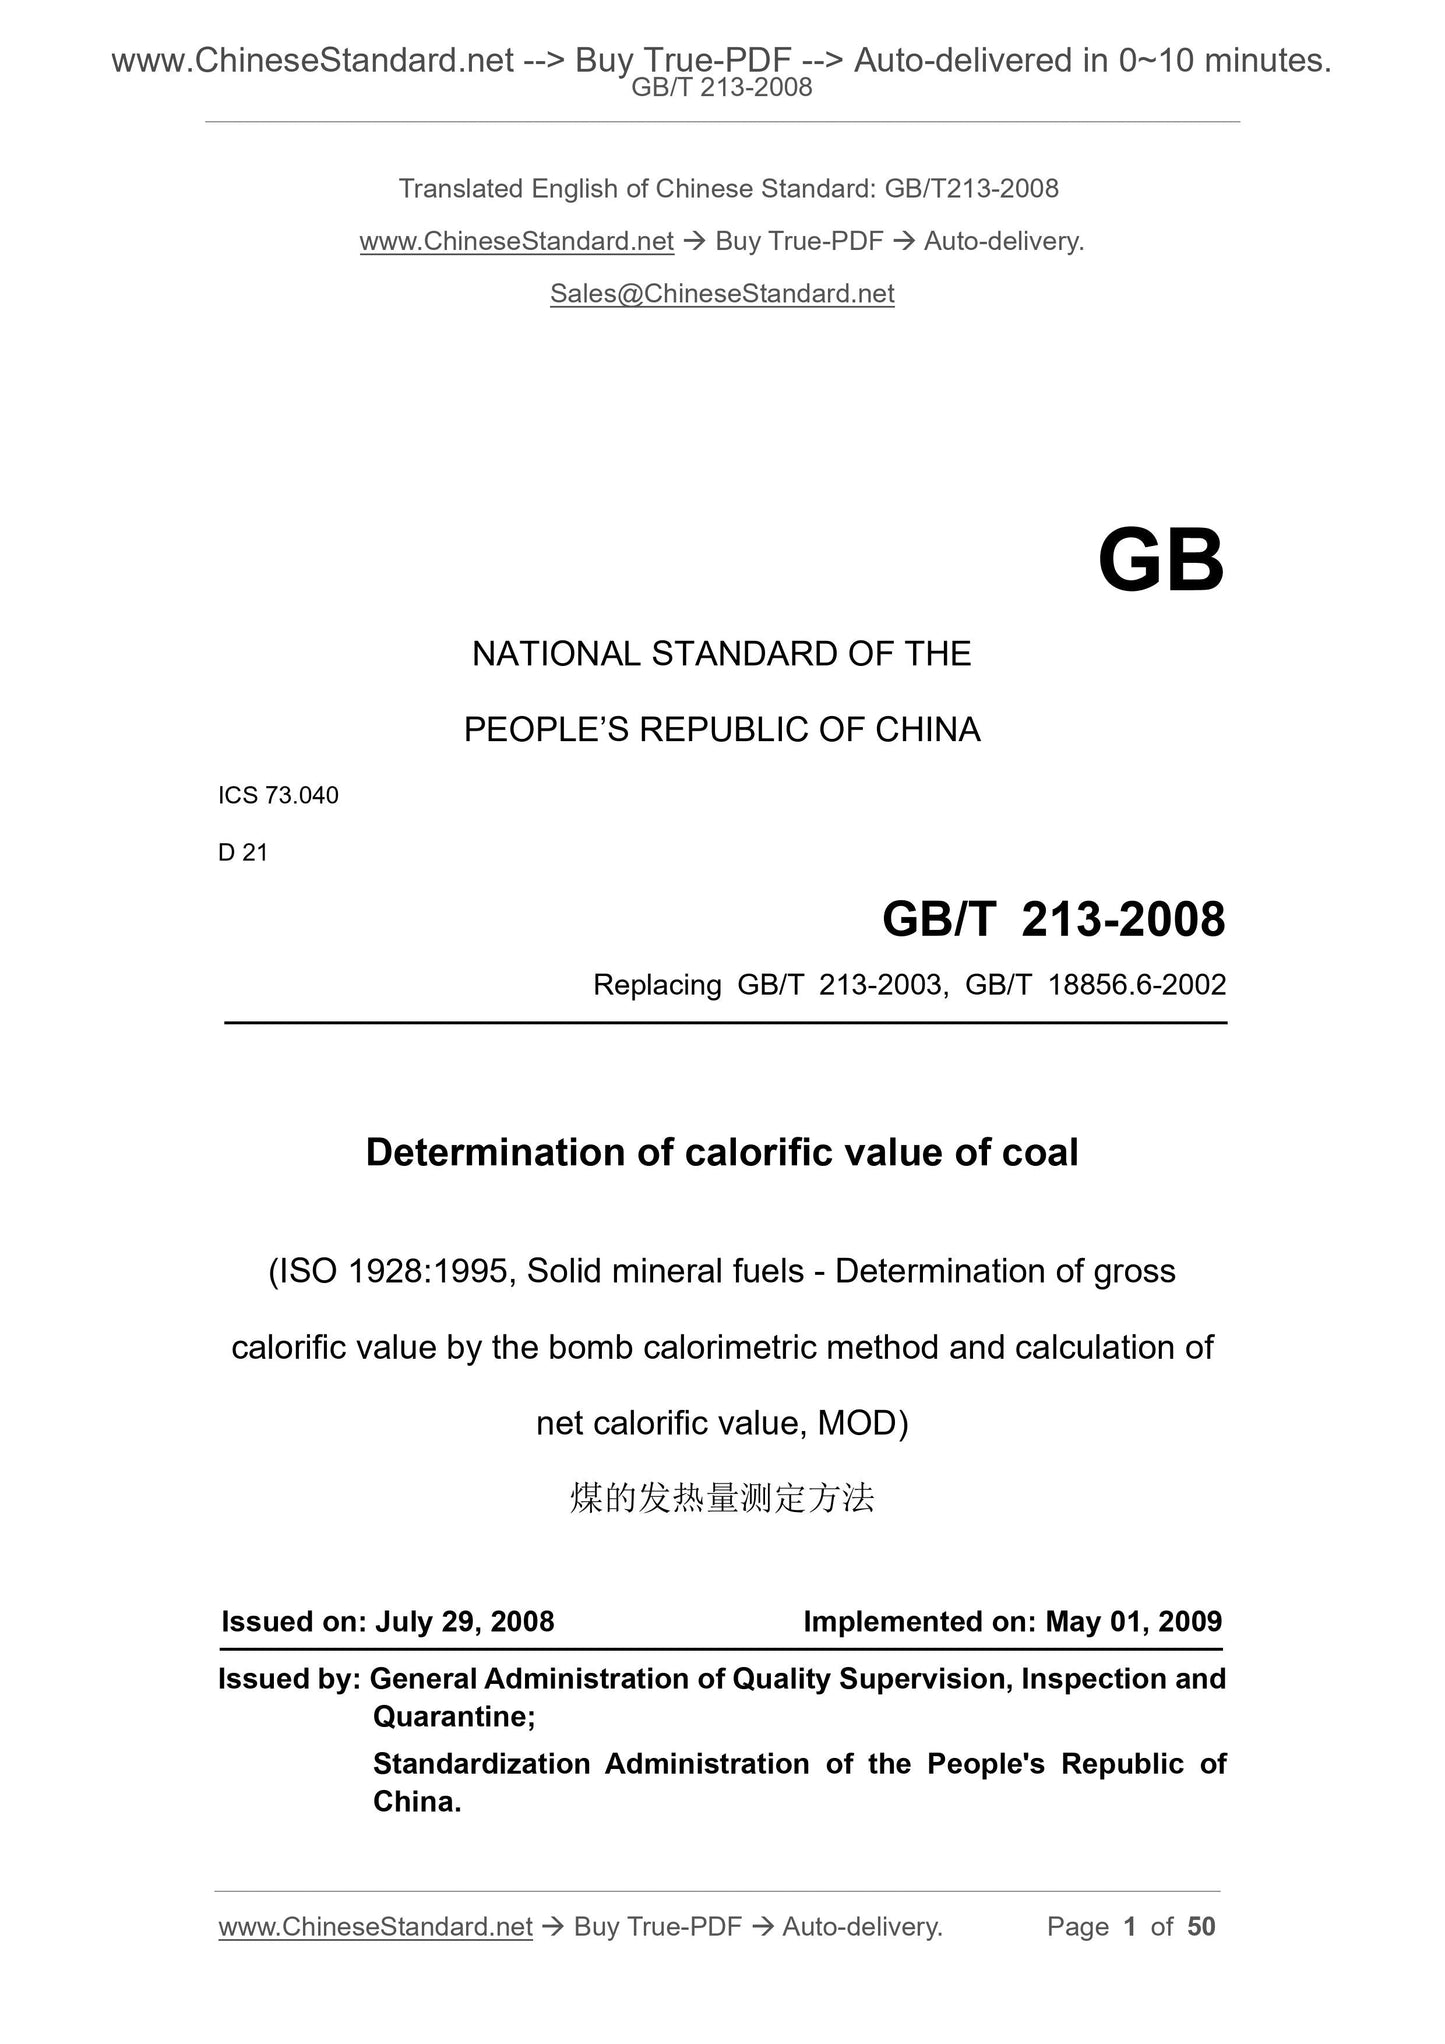 GB/T 213-2008 Page 1